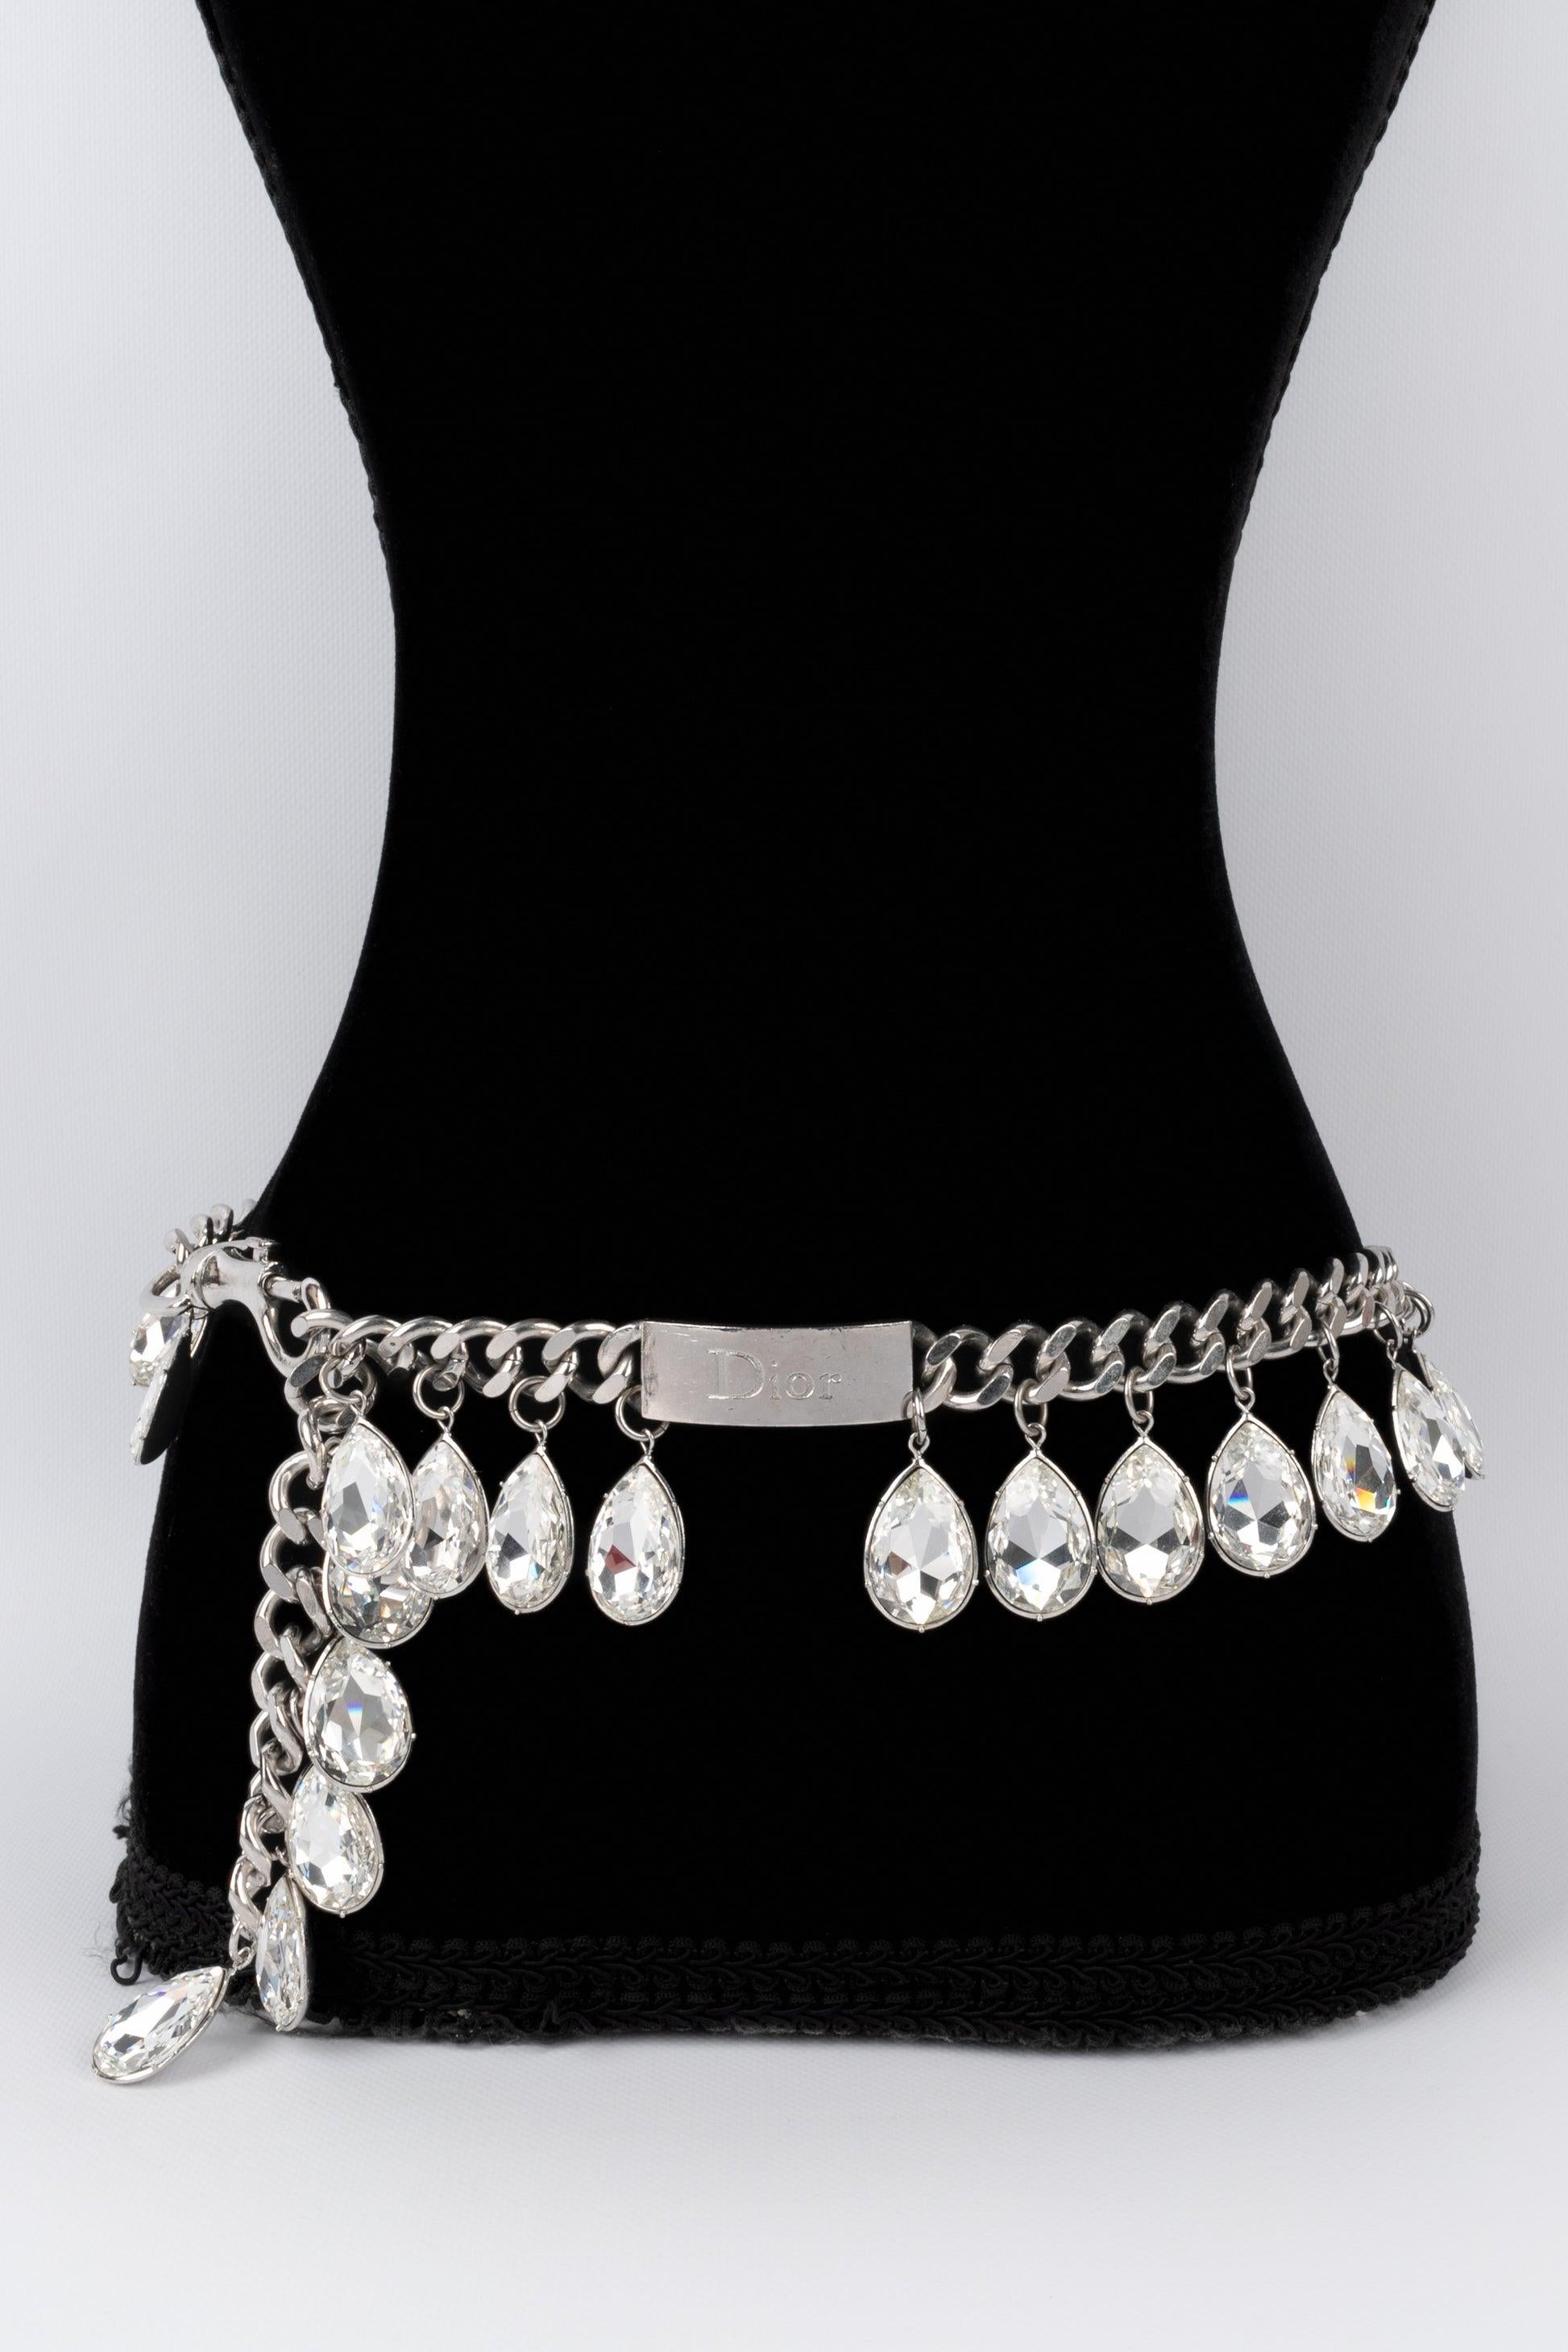 Dior - Silvery metal chain belt ornamented with impressive rhinestone drops. 2004 Fall-Winter Ready-to-Wear Collection under the artistic direction of John Galliano.

Additional information:
Condition: Very good condition
Dimensions: Length: 90